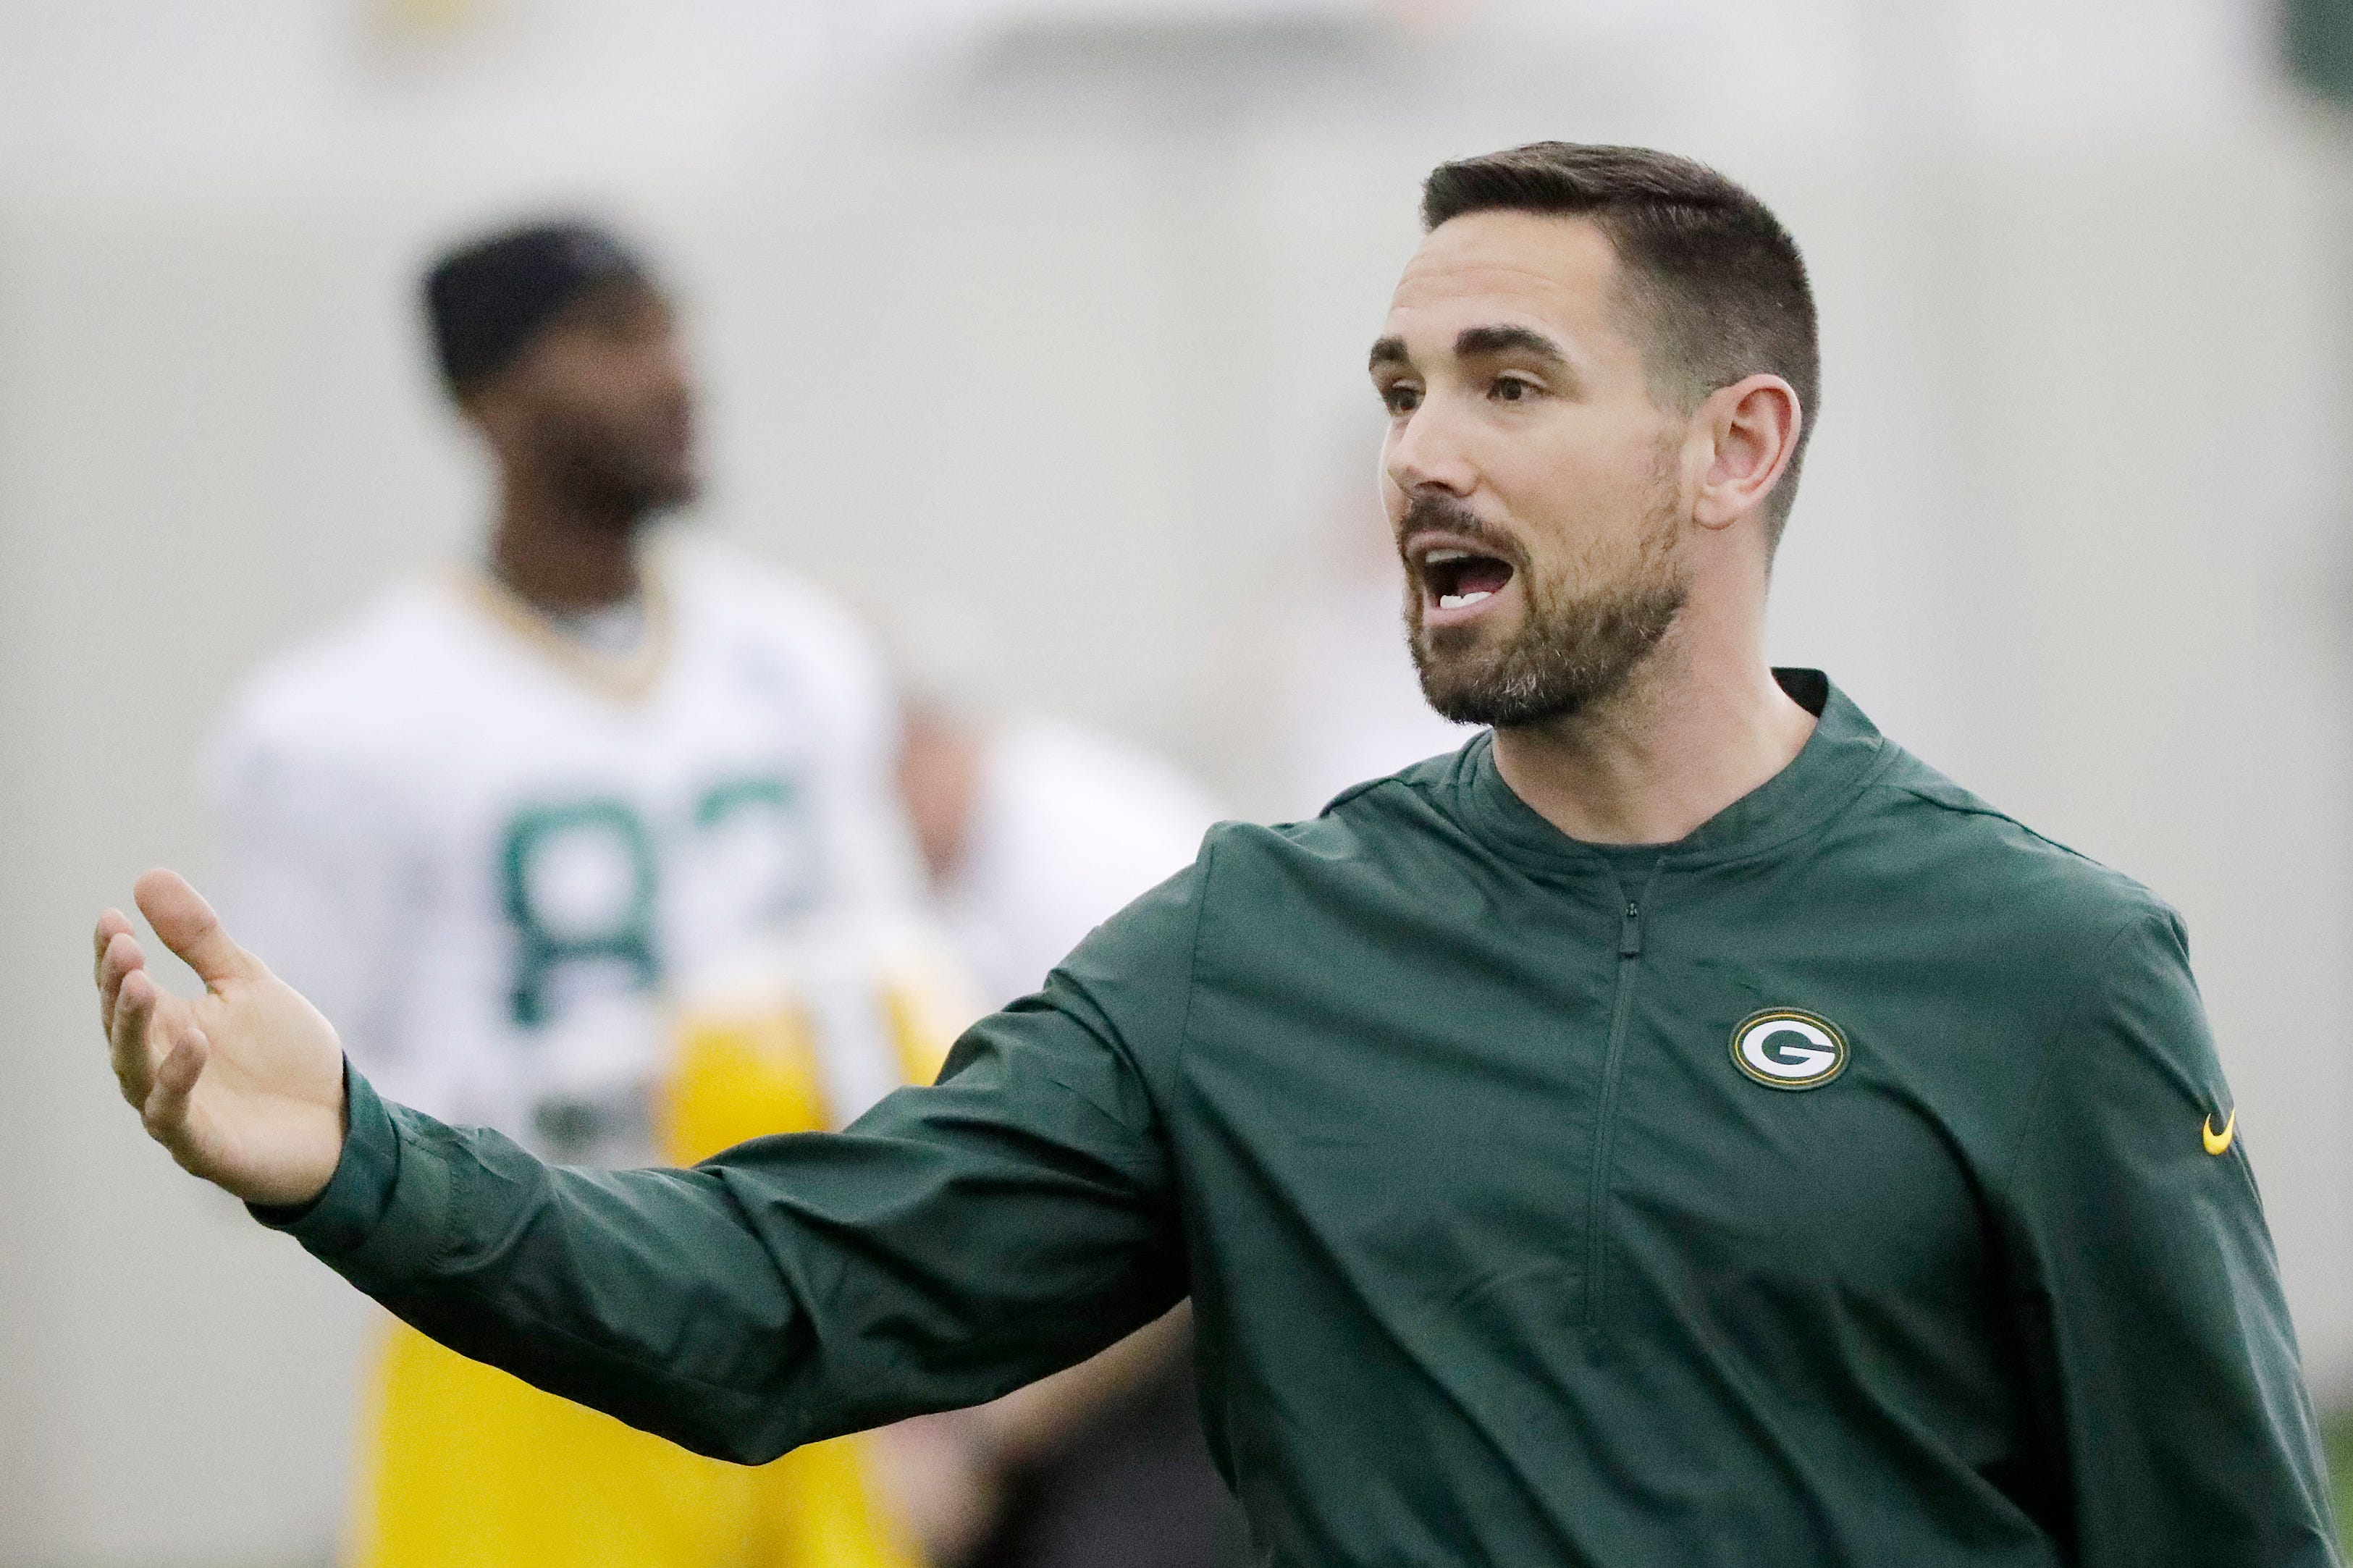 Green Bay Packers head coach Matt LaFleur during a team practice at the Don Hutson Center on Wednesday, April 24, 2019 in Ashwaubenon, Wis.